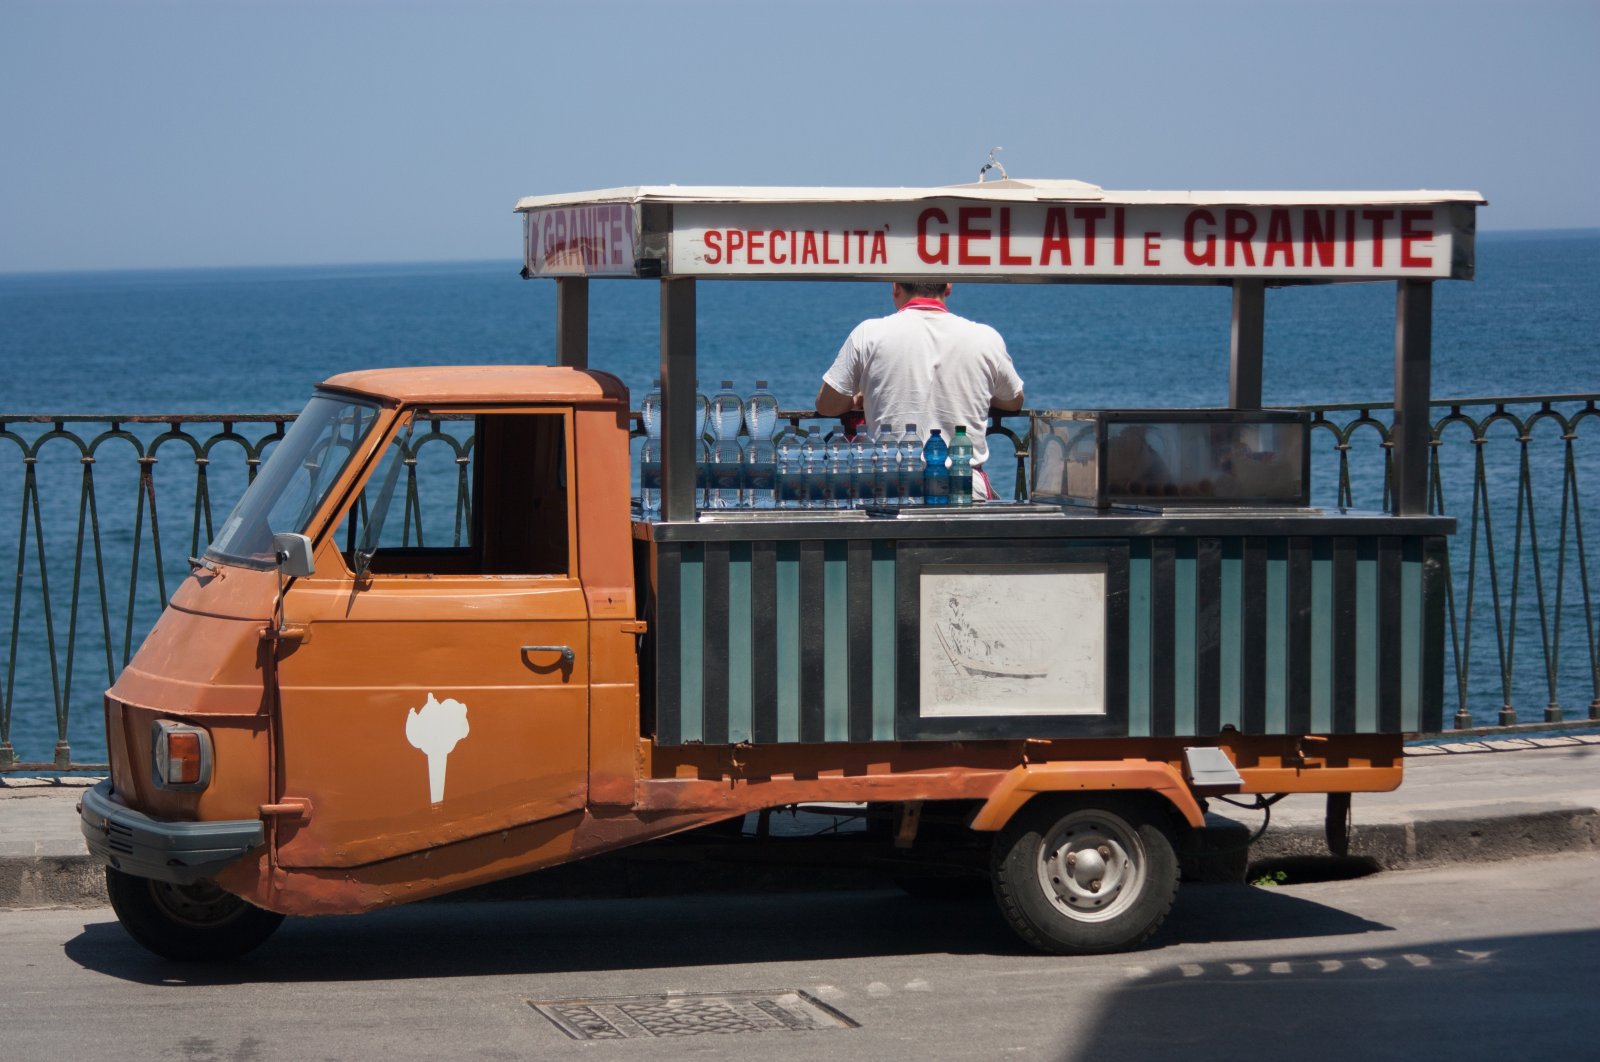 Italians run many of the ice cream parlors in many places and dominate the market in much of Europe. (DPA Photo)